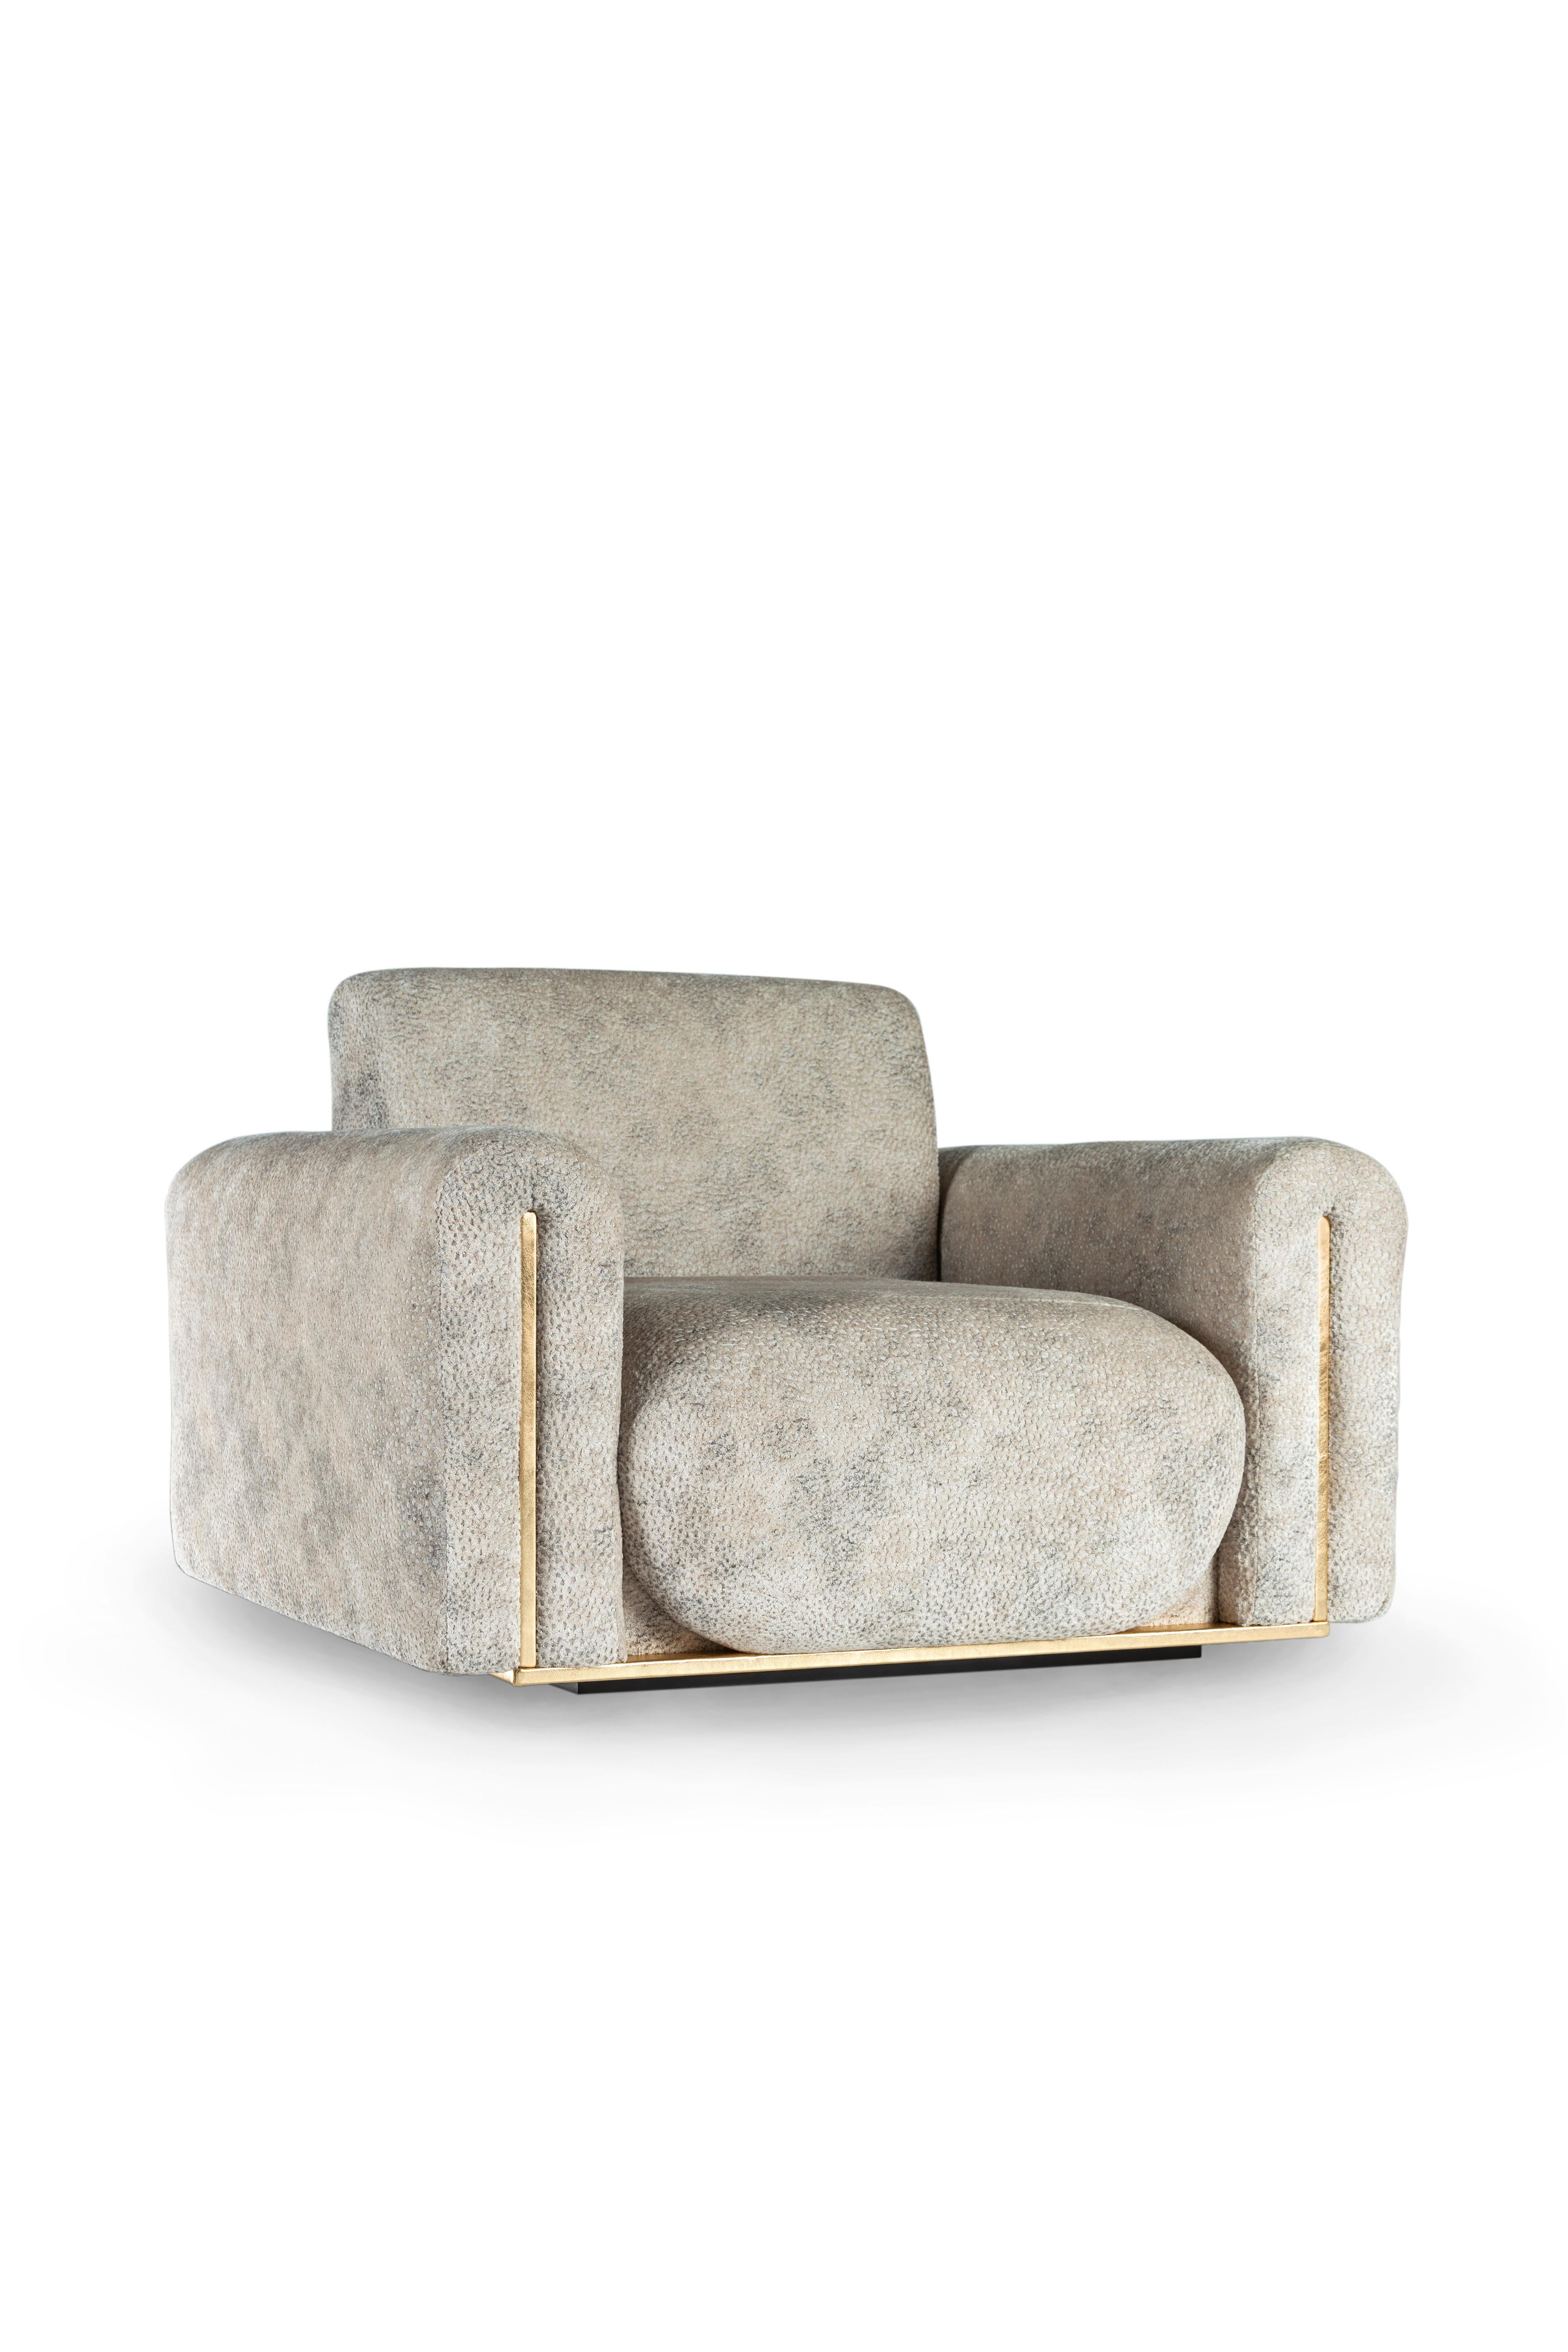 Hand-Crafted Modern Beijinho Outdoors Armchair, Beige, Handmade in Portugal by Greenapple For Sale